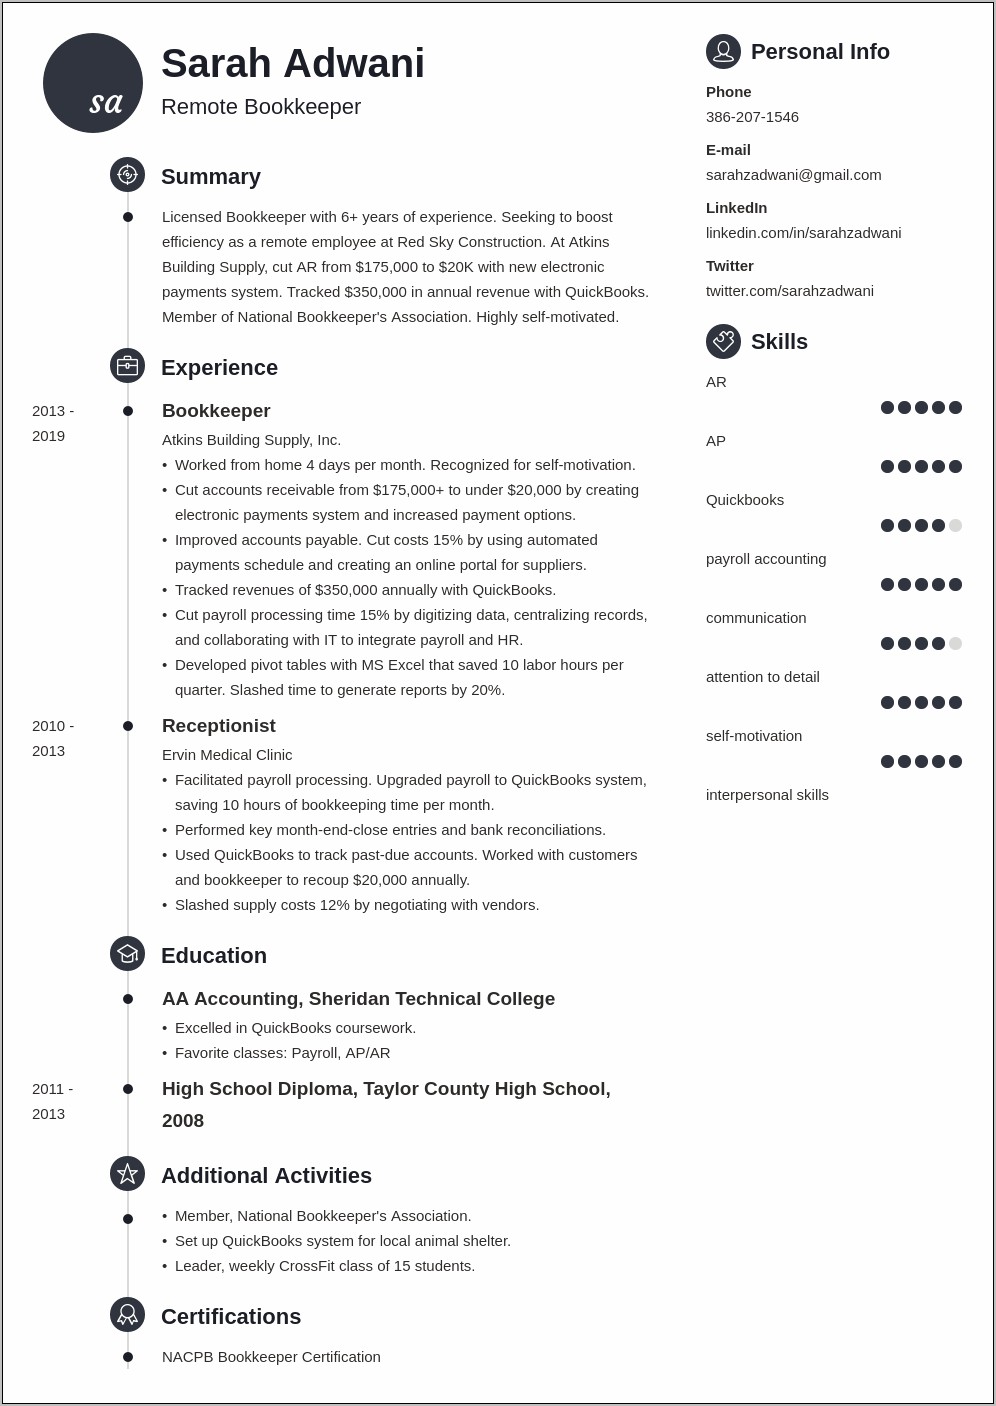 Best Stay At Home Mom Resume Example